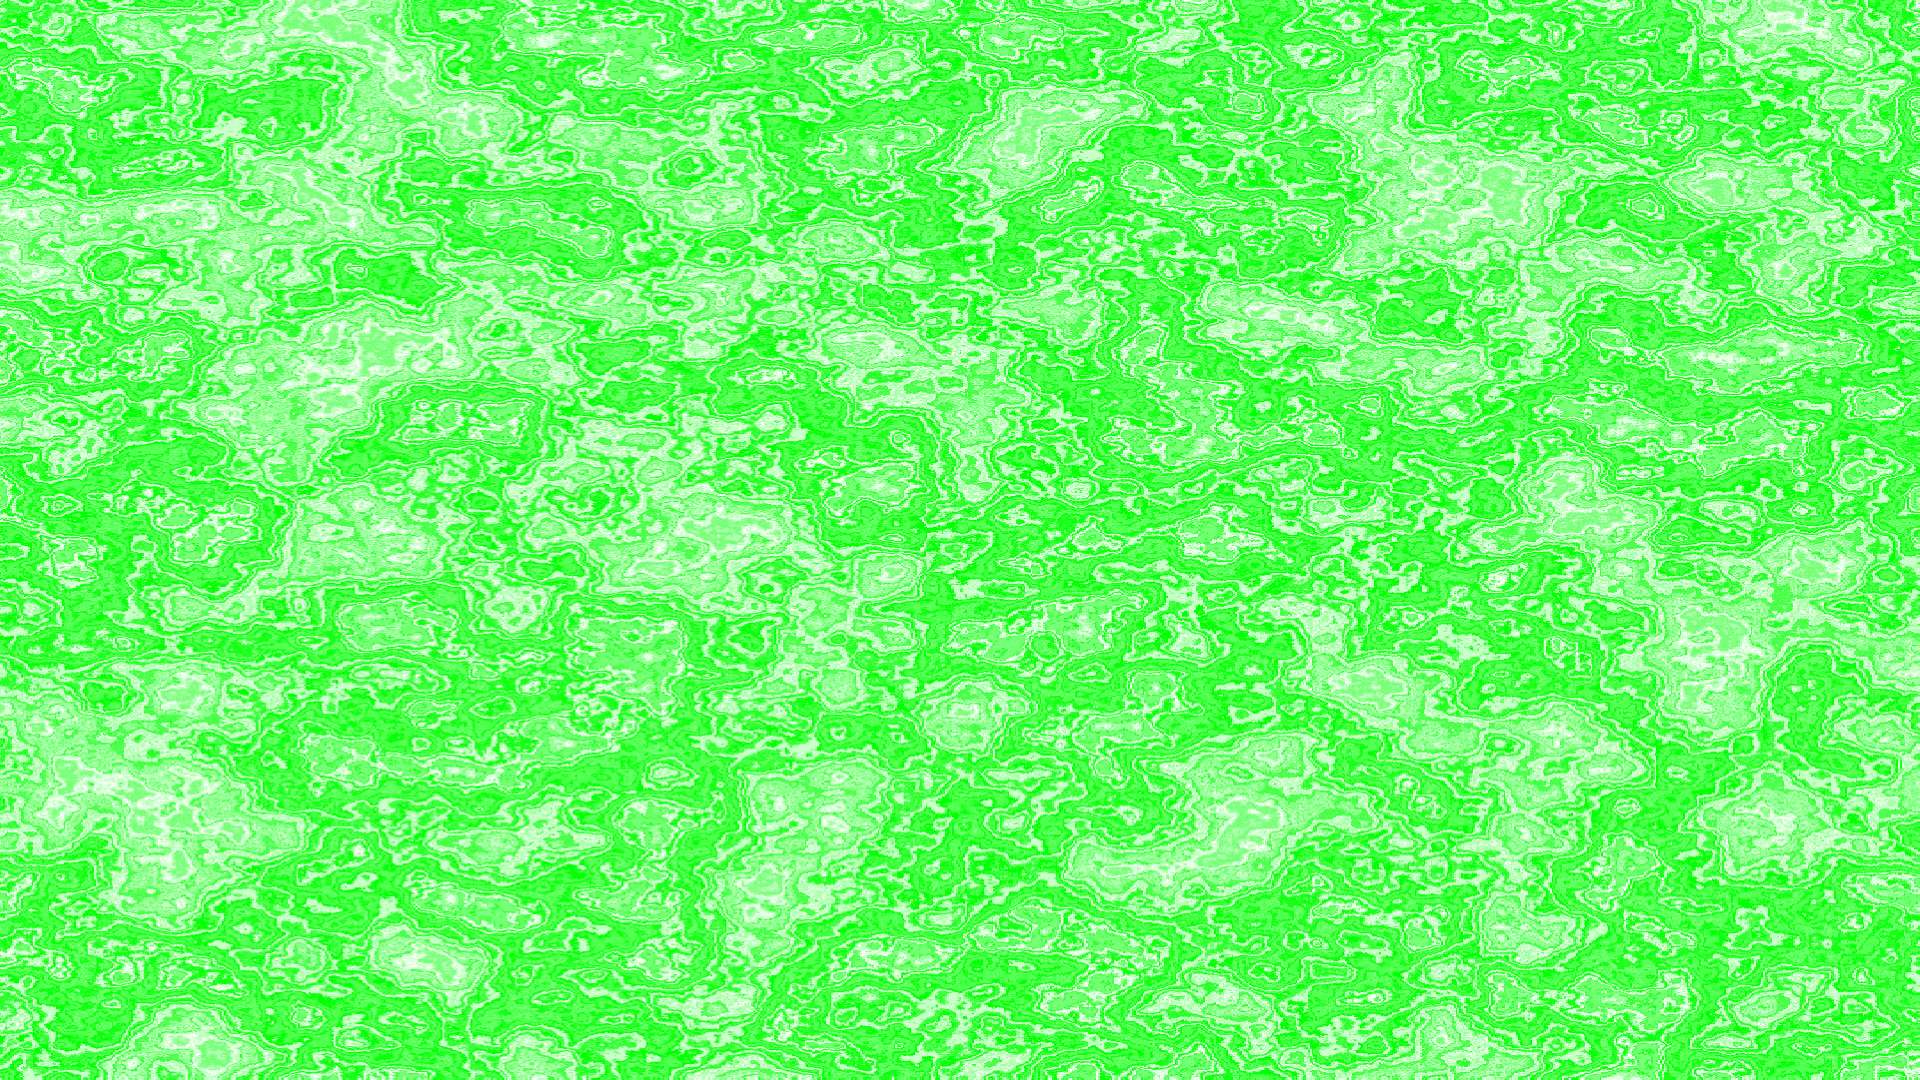 Green Background Hd Image Image